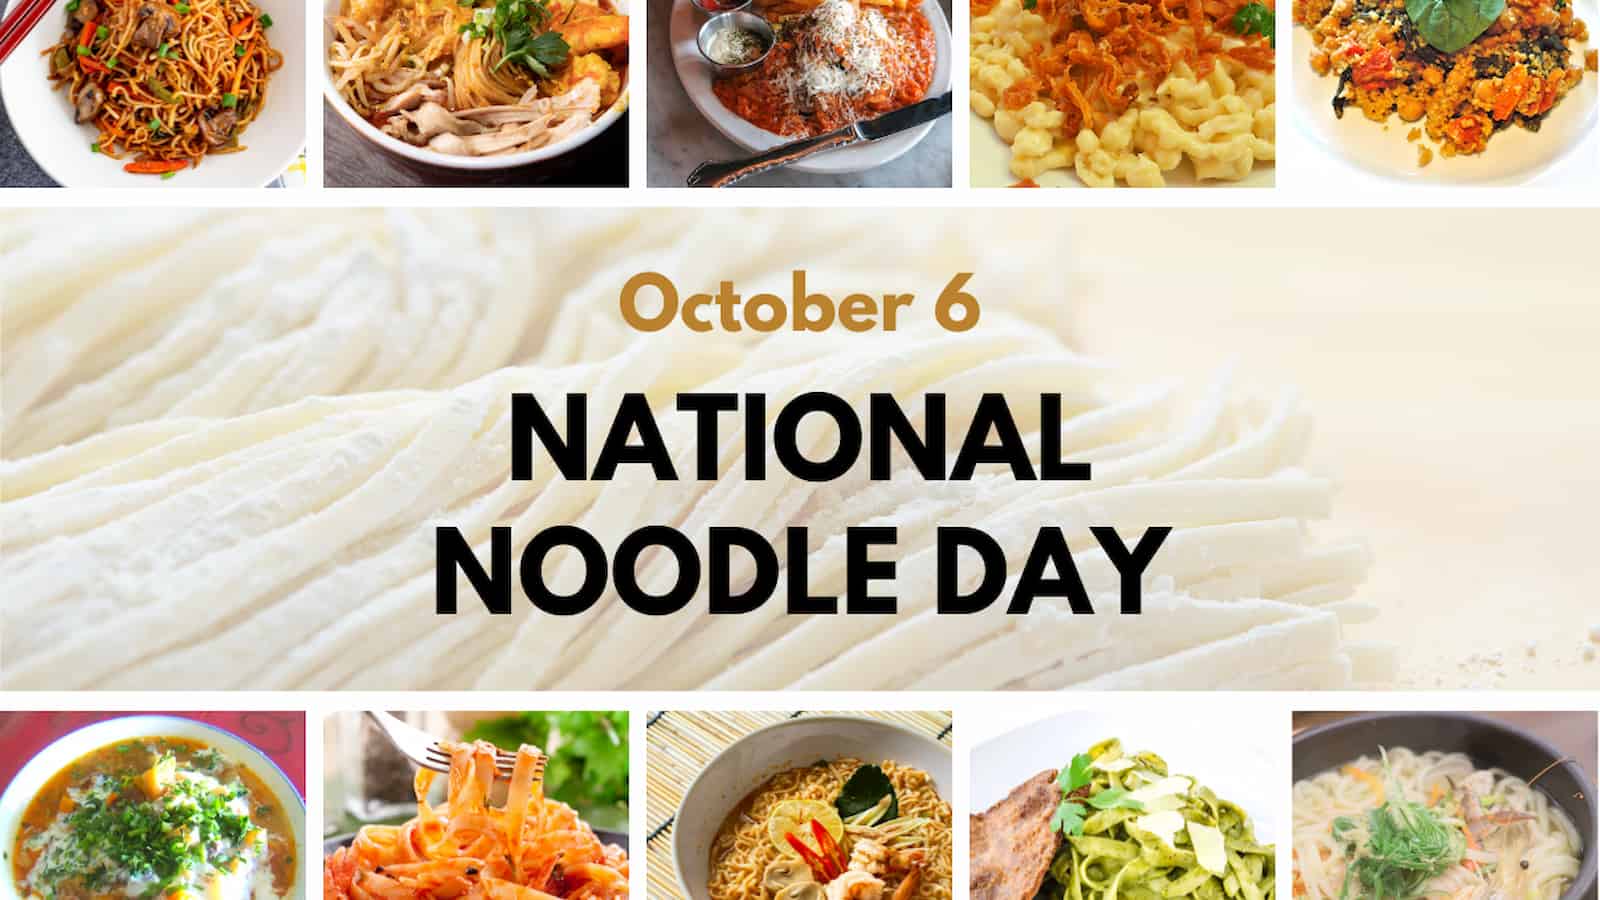 Happy National Noodle Day Quotes, Messages And Noodle Myth - Eduvast.com